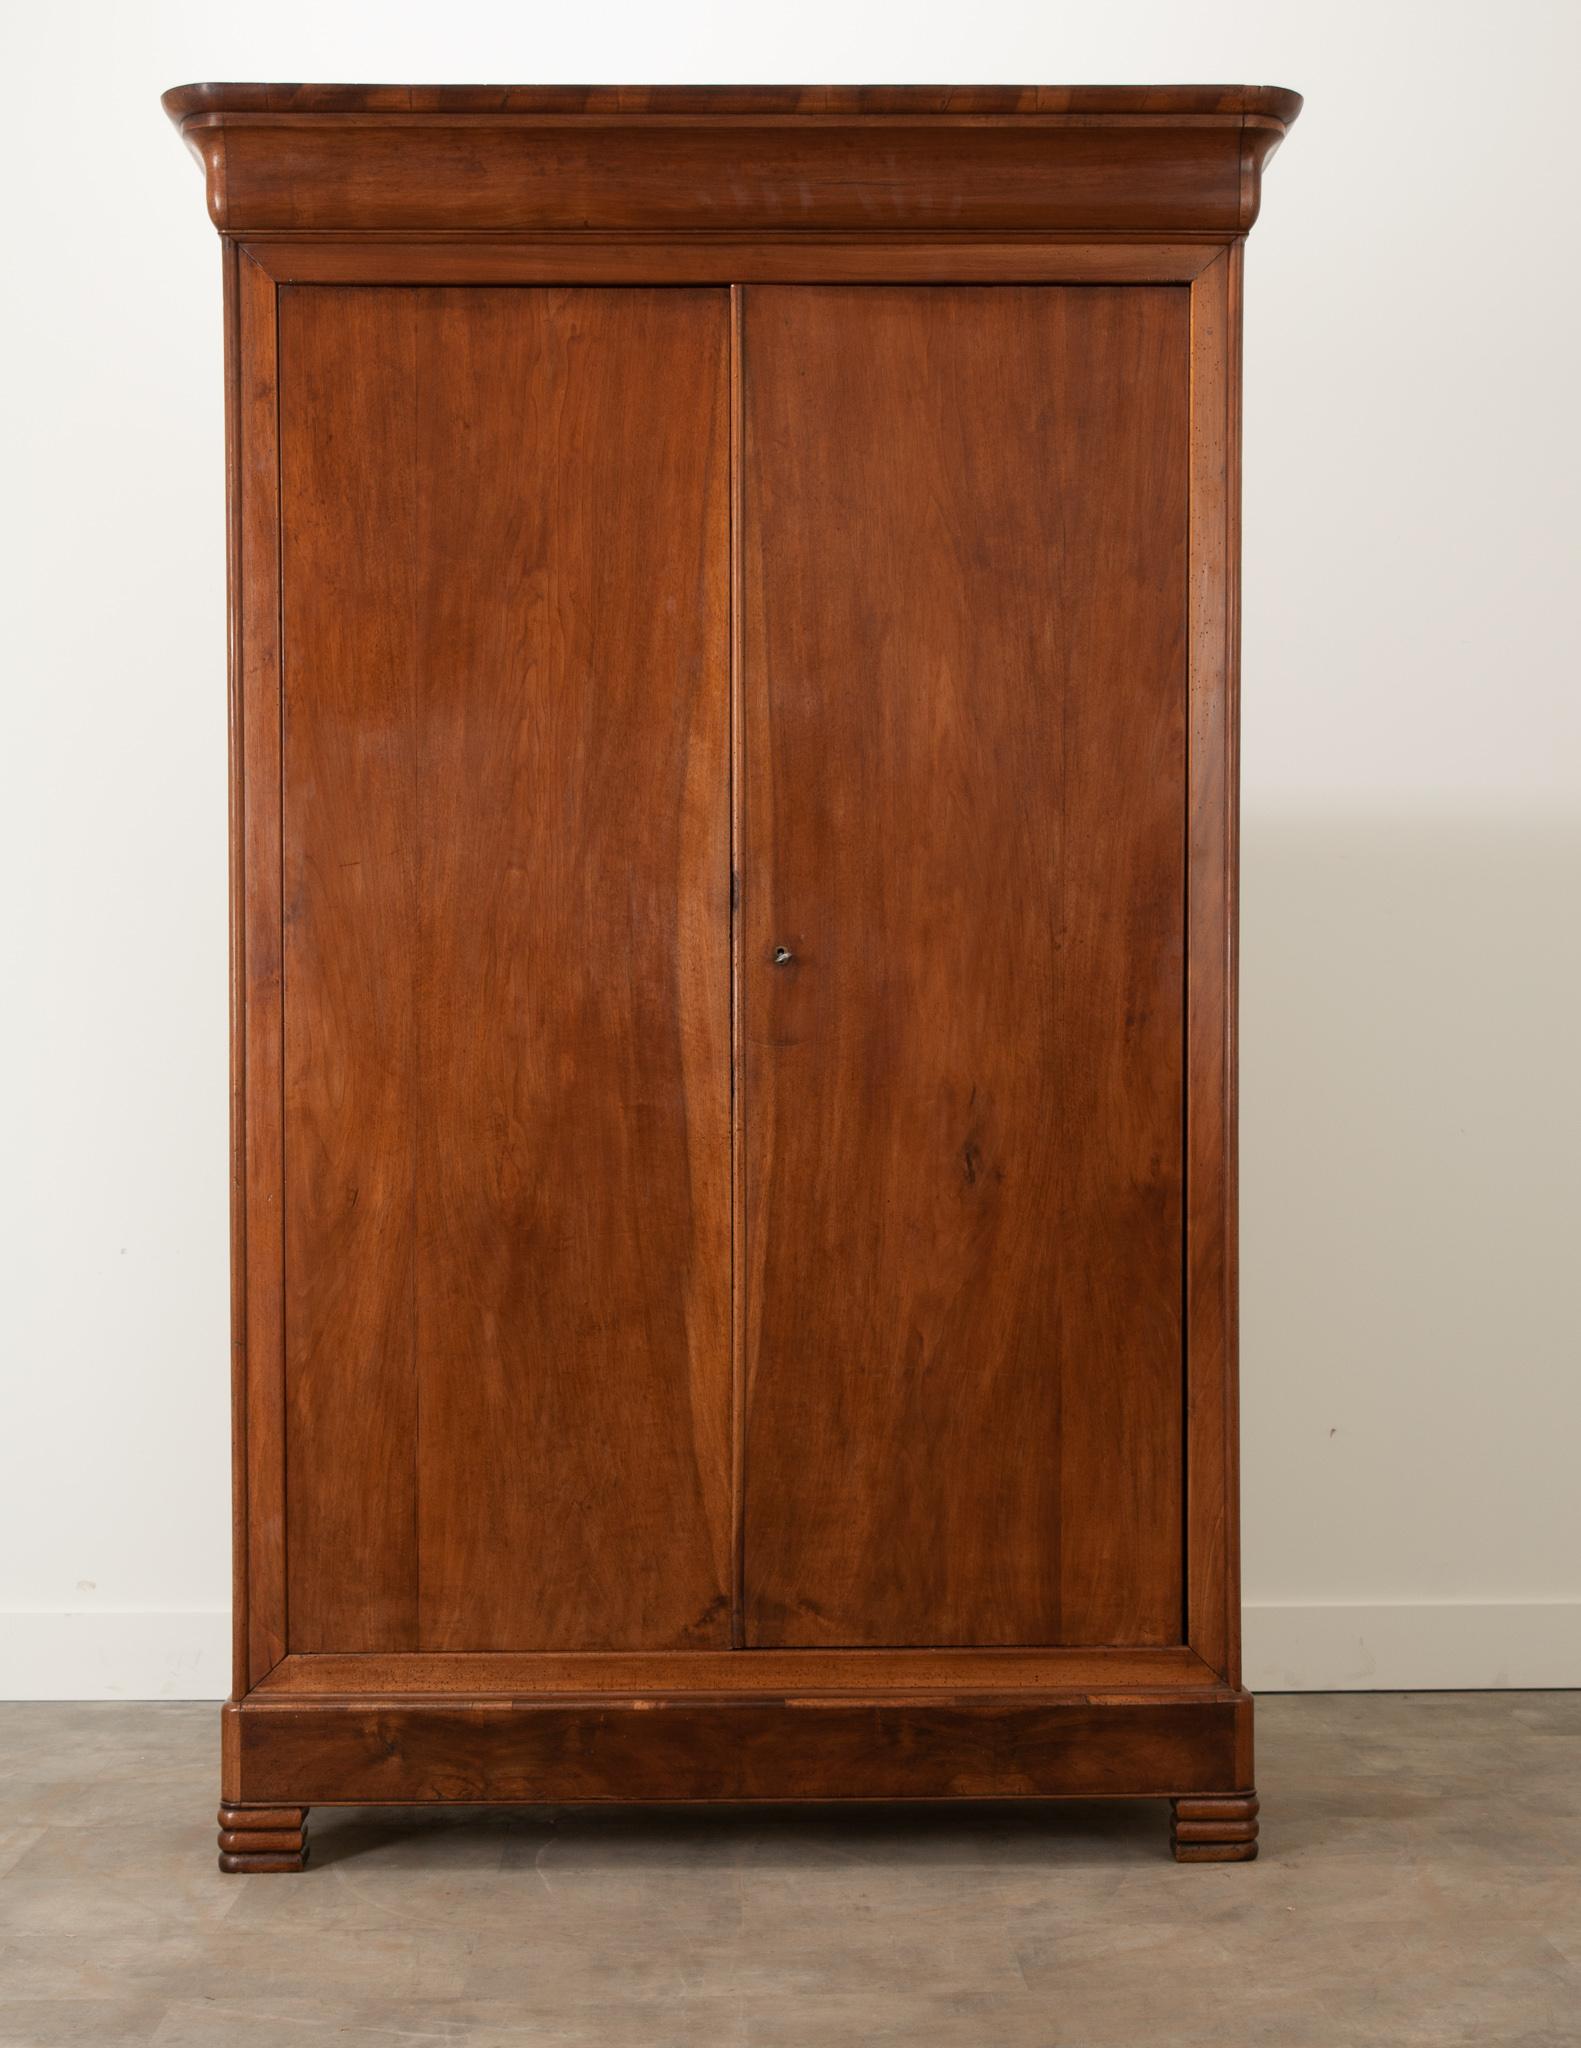 A handsome 19th century walnut armoire, made in France in the Louis Philippe style. This tall case antique has a simple, linear composition – an attribute that makes Louis Philippe pieces ideal for their versatility and placement possibilities. This